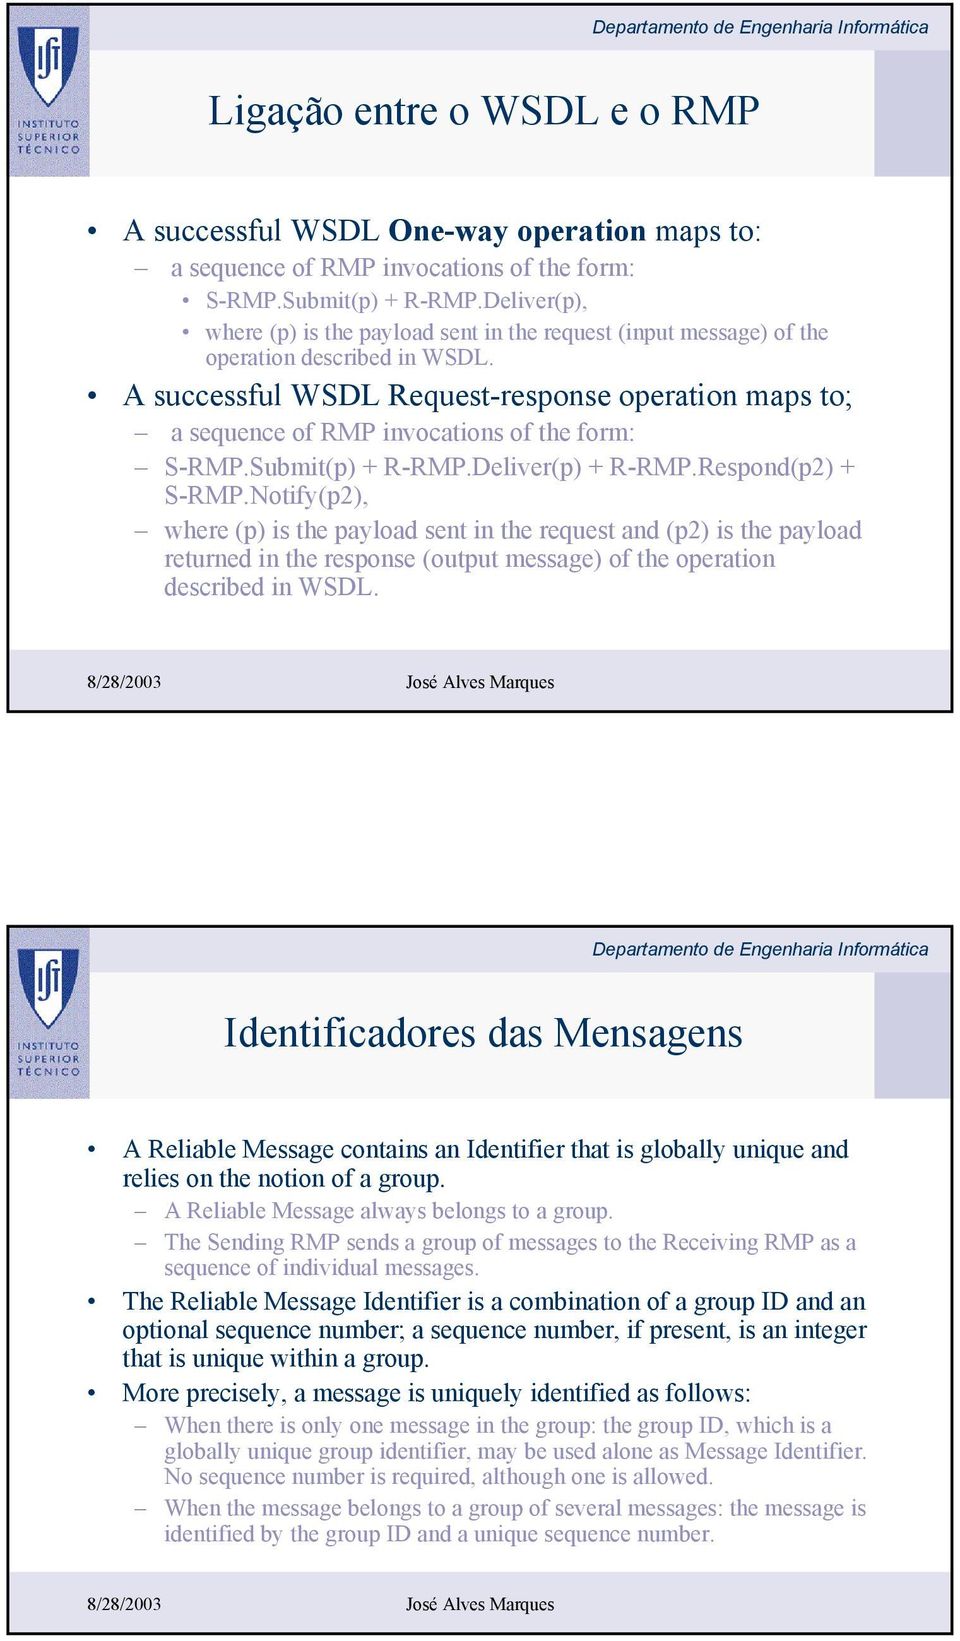 A successful WSDL Request-response operation maps to; a sequence of RMP invocations of the form: S-RMP.Submit(p) + R-RMP.Deliver(p) + R-RMP.Respond(p2) + S-RMP.